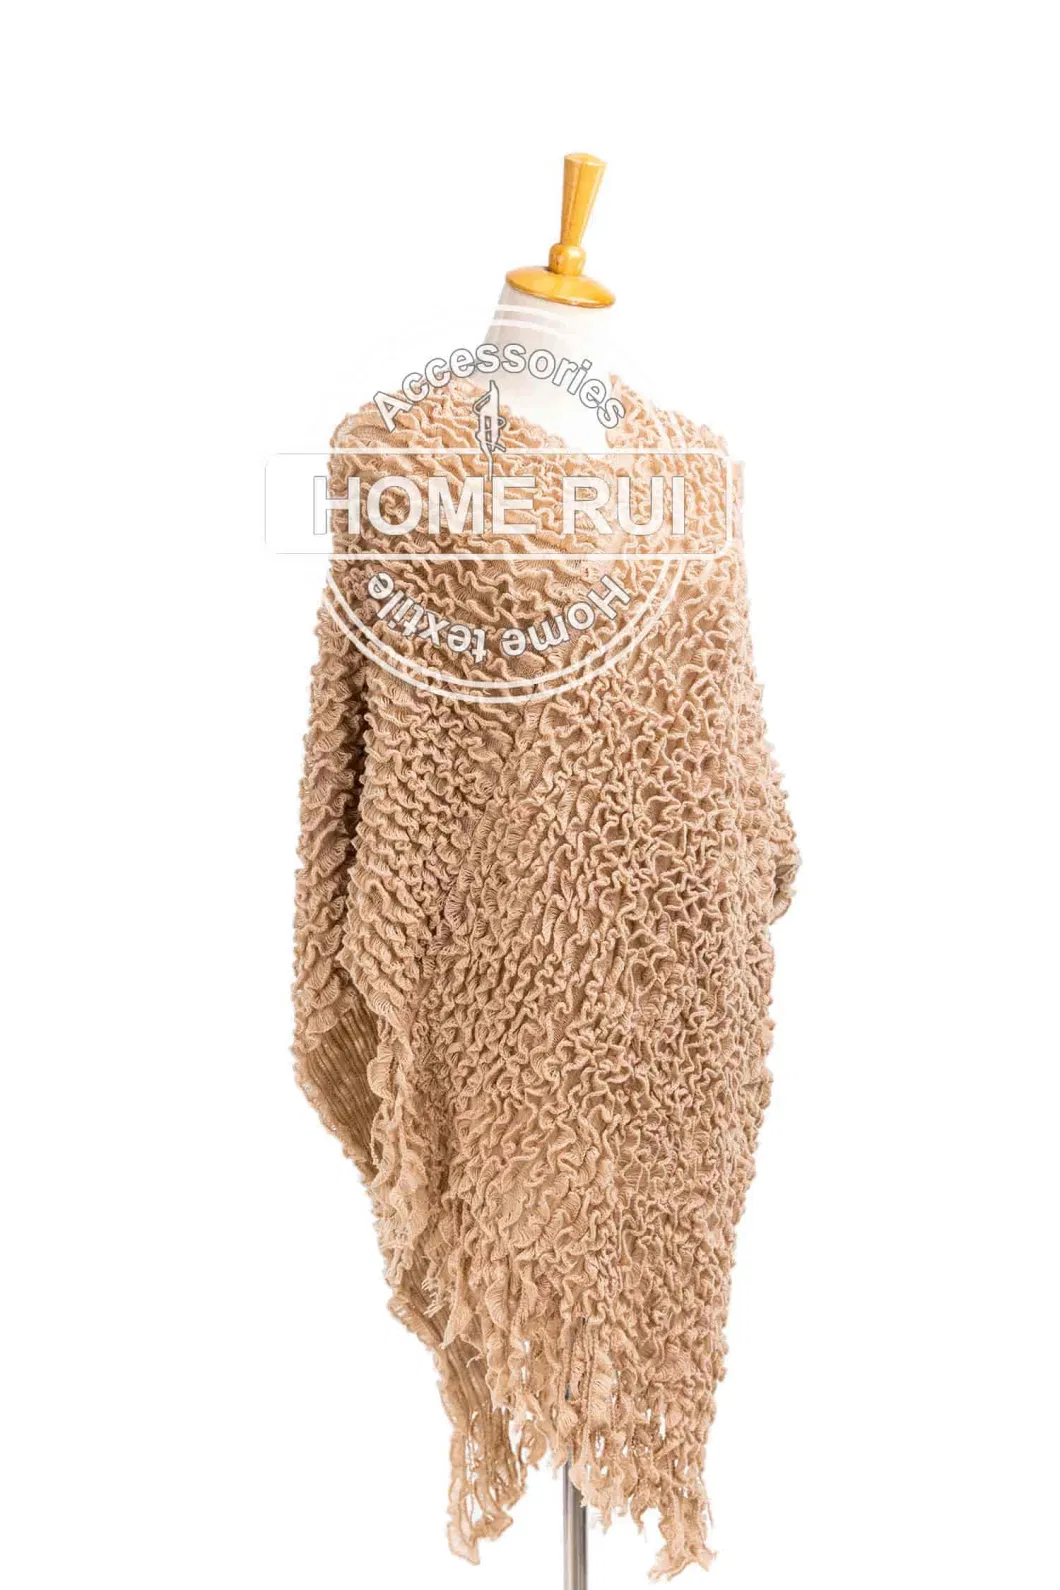 Home Rui Manufacturer Outerwear Spring Autumn Woman Apparel Accessory Warmth Wraps Knitted Frill Waves Fringe Pullover Oversize Ruffled Shawl Cloak Cape